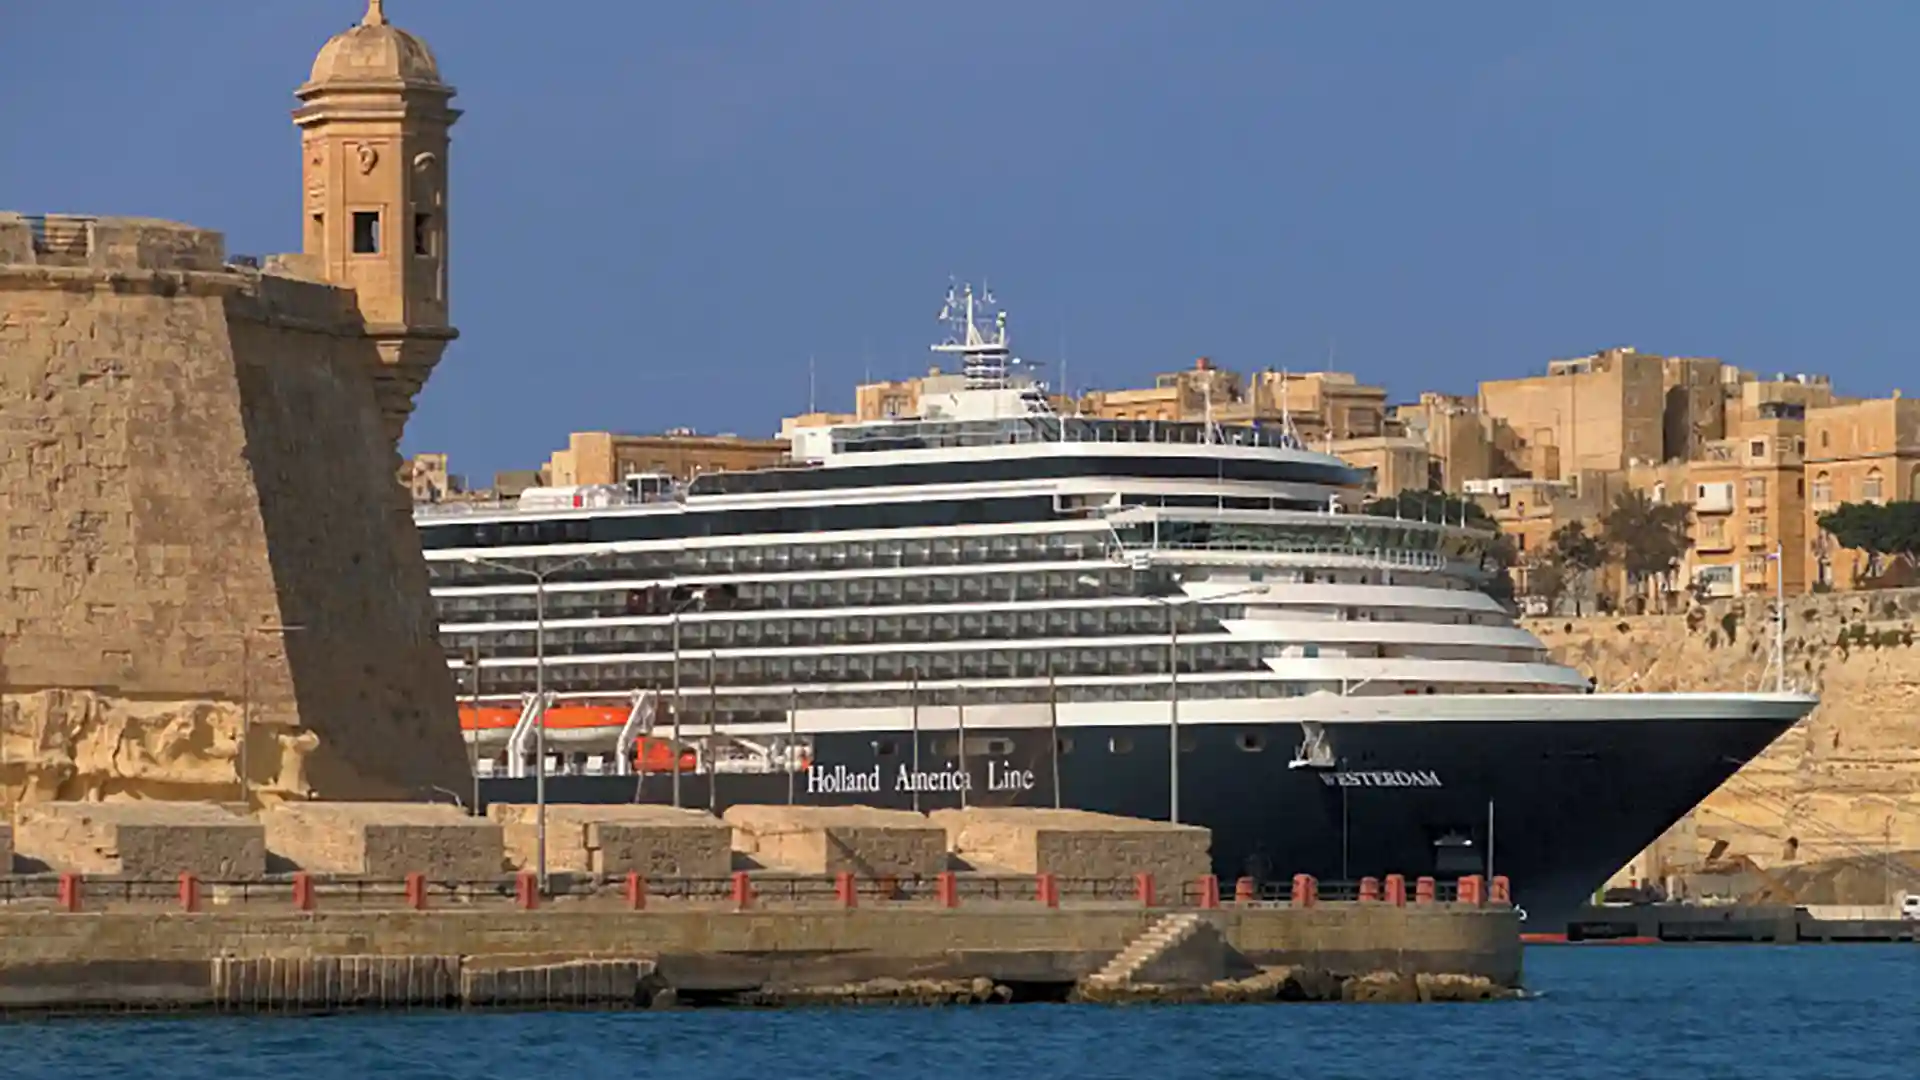 View of Holland America Line cruise ship in Malta on Mediterranean cruise.